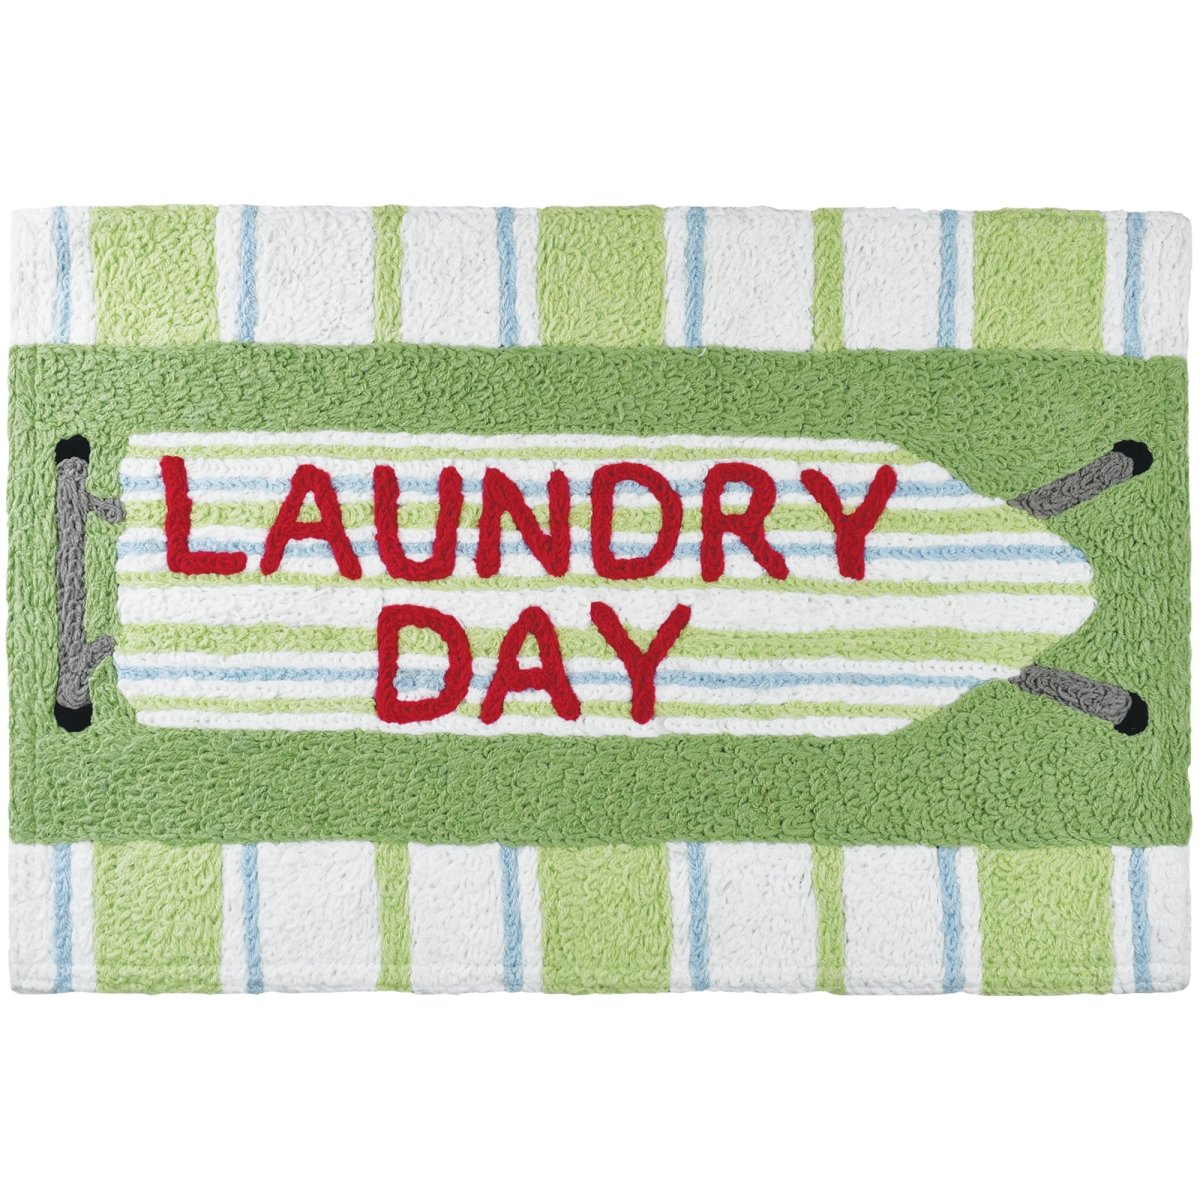 Jb-sg001 20 X 30 In. Laundry Day Rug